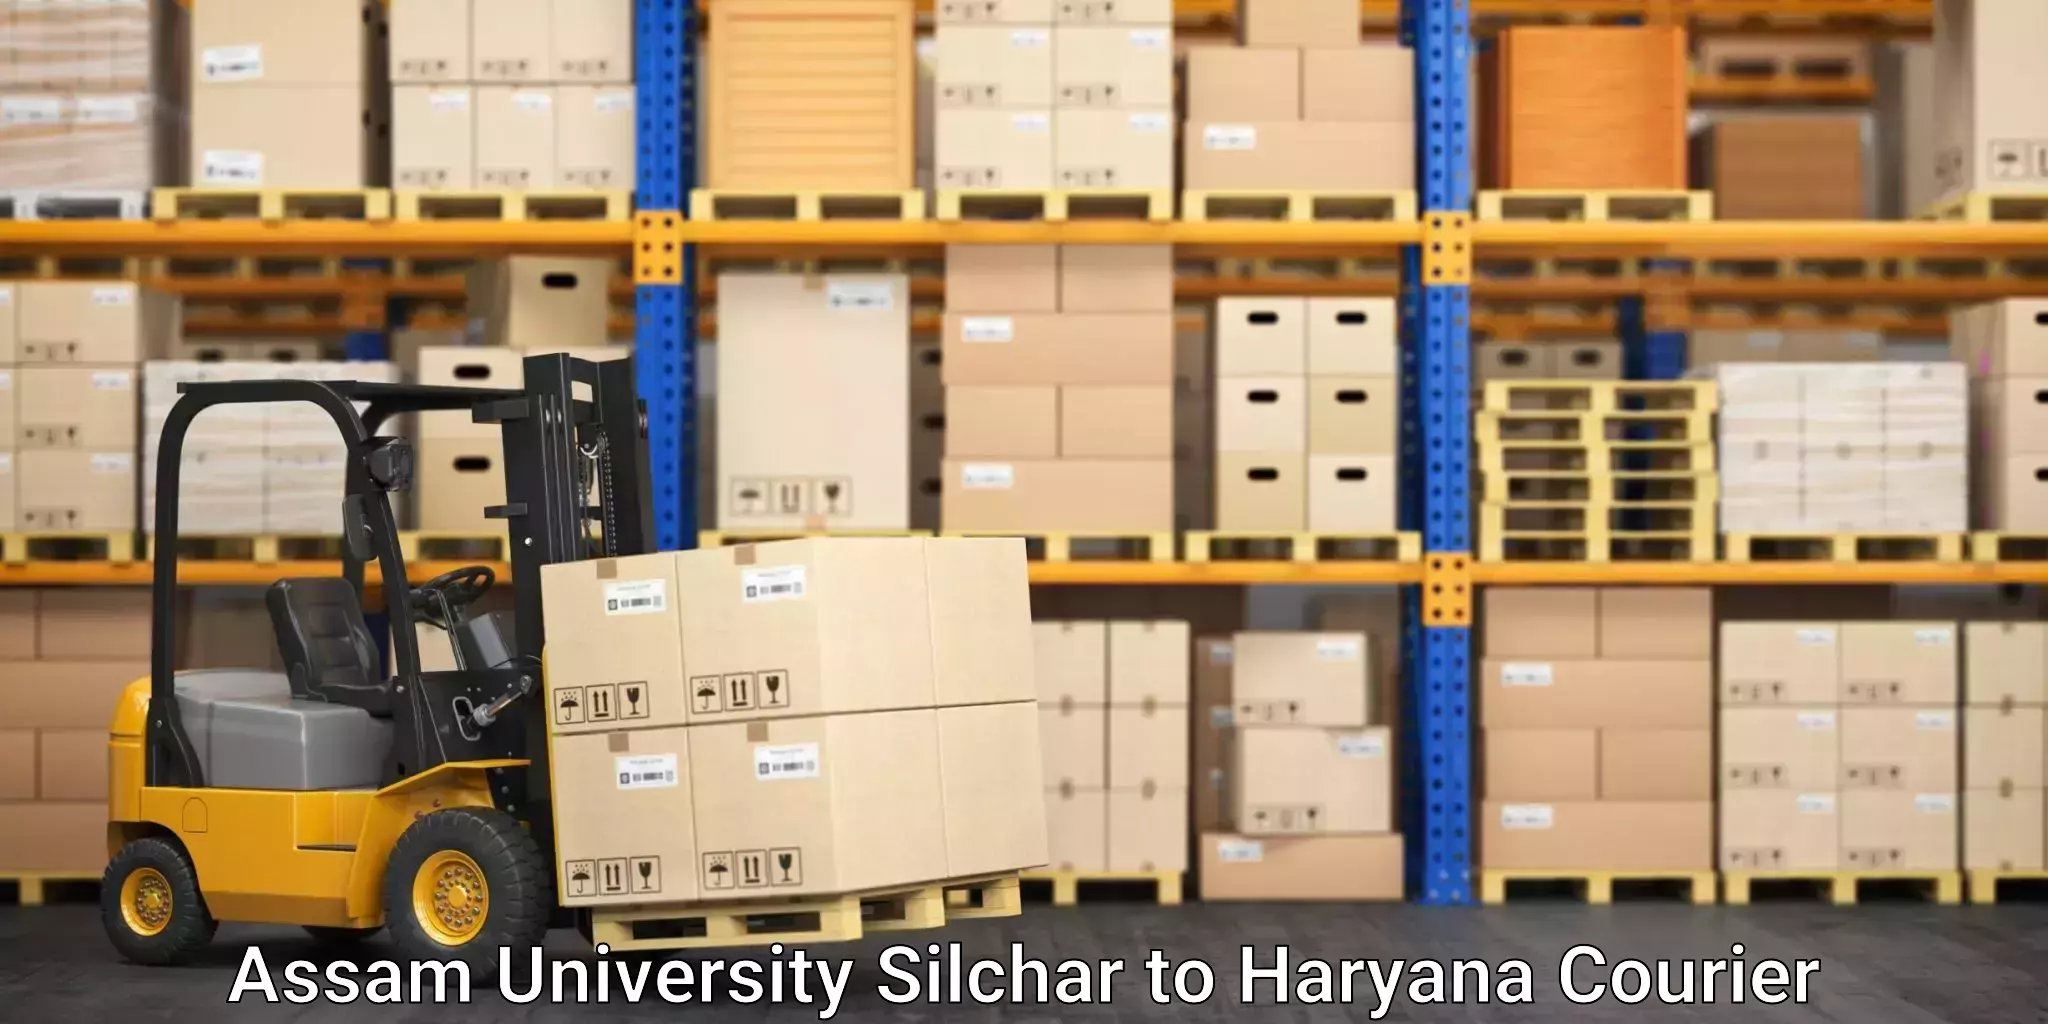 Tailored freight services Assam University Silchar to Sohna